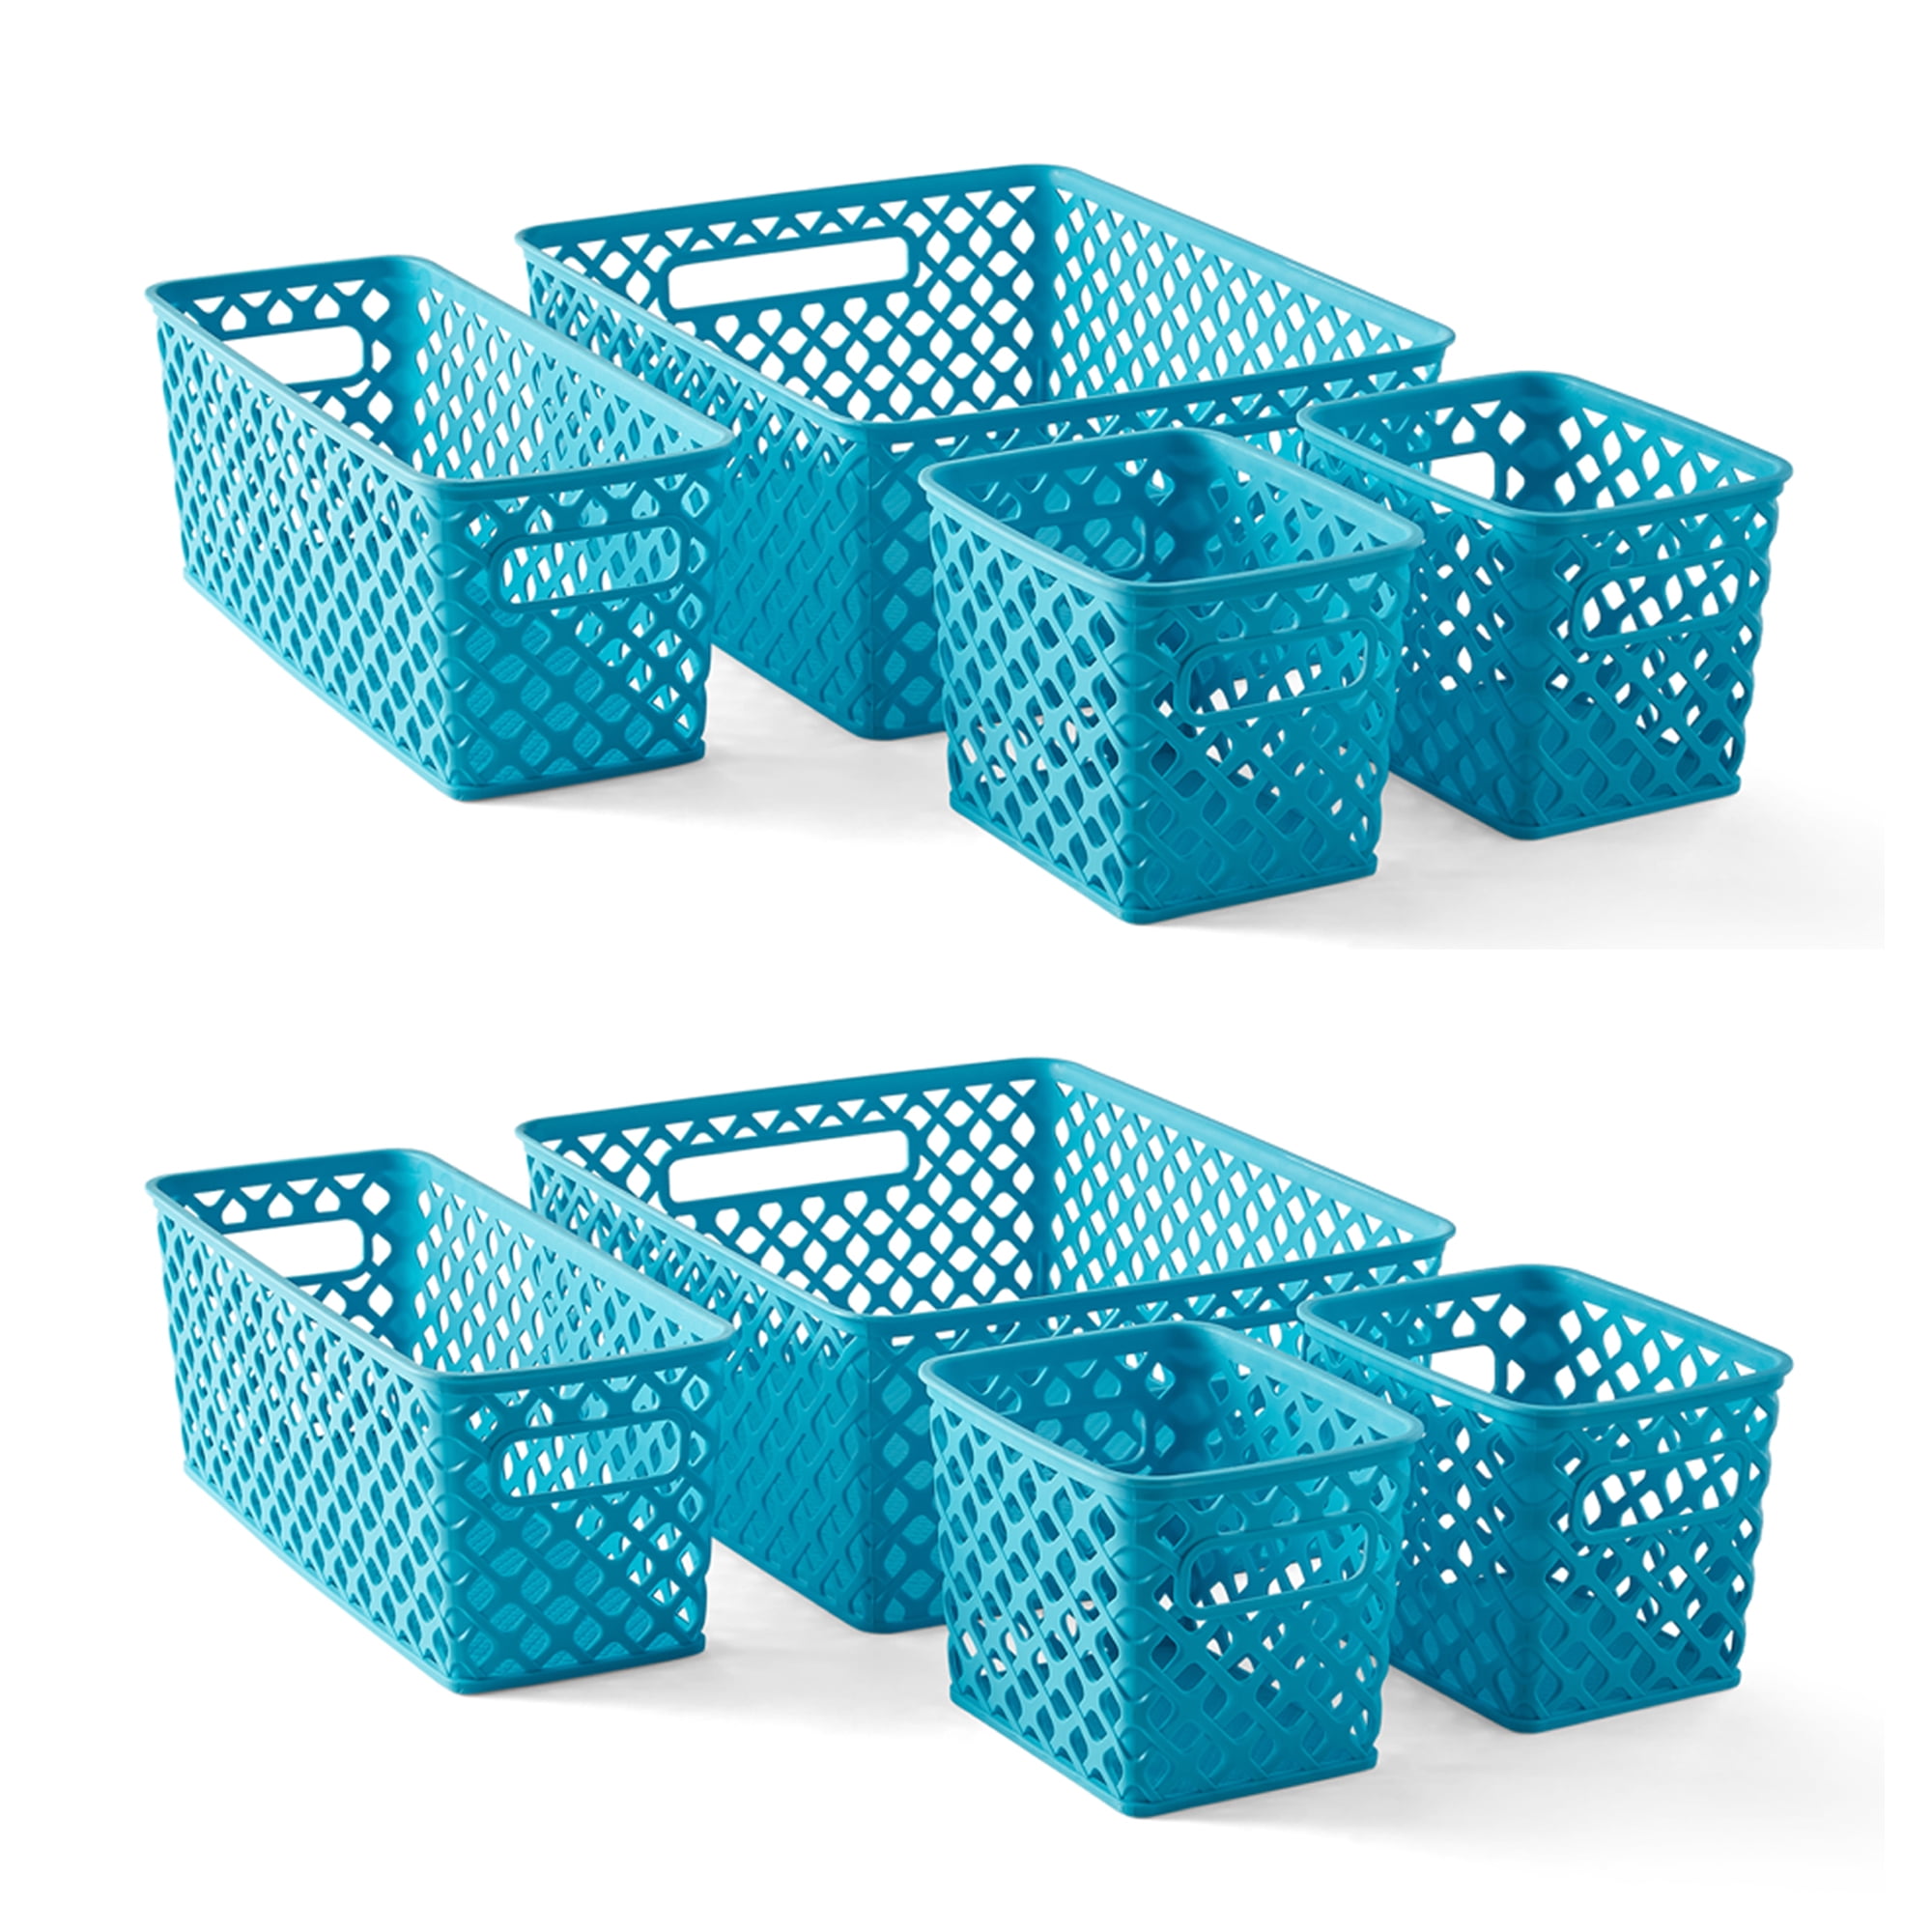 4 Pack Canvas Storage Basket Bins Home Decor Organizers Bag for Adult Makeup Books Baby Toys Liners 4 pack, White & Black